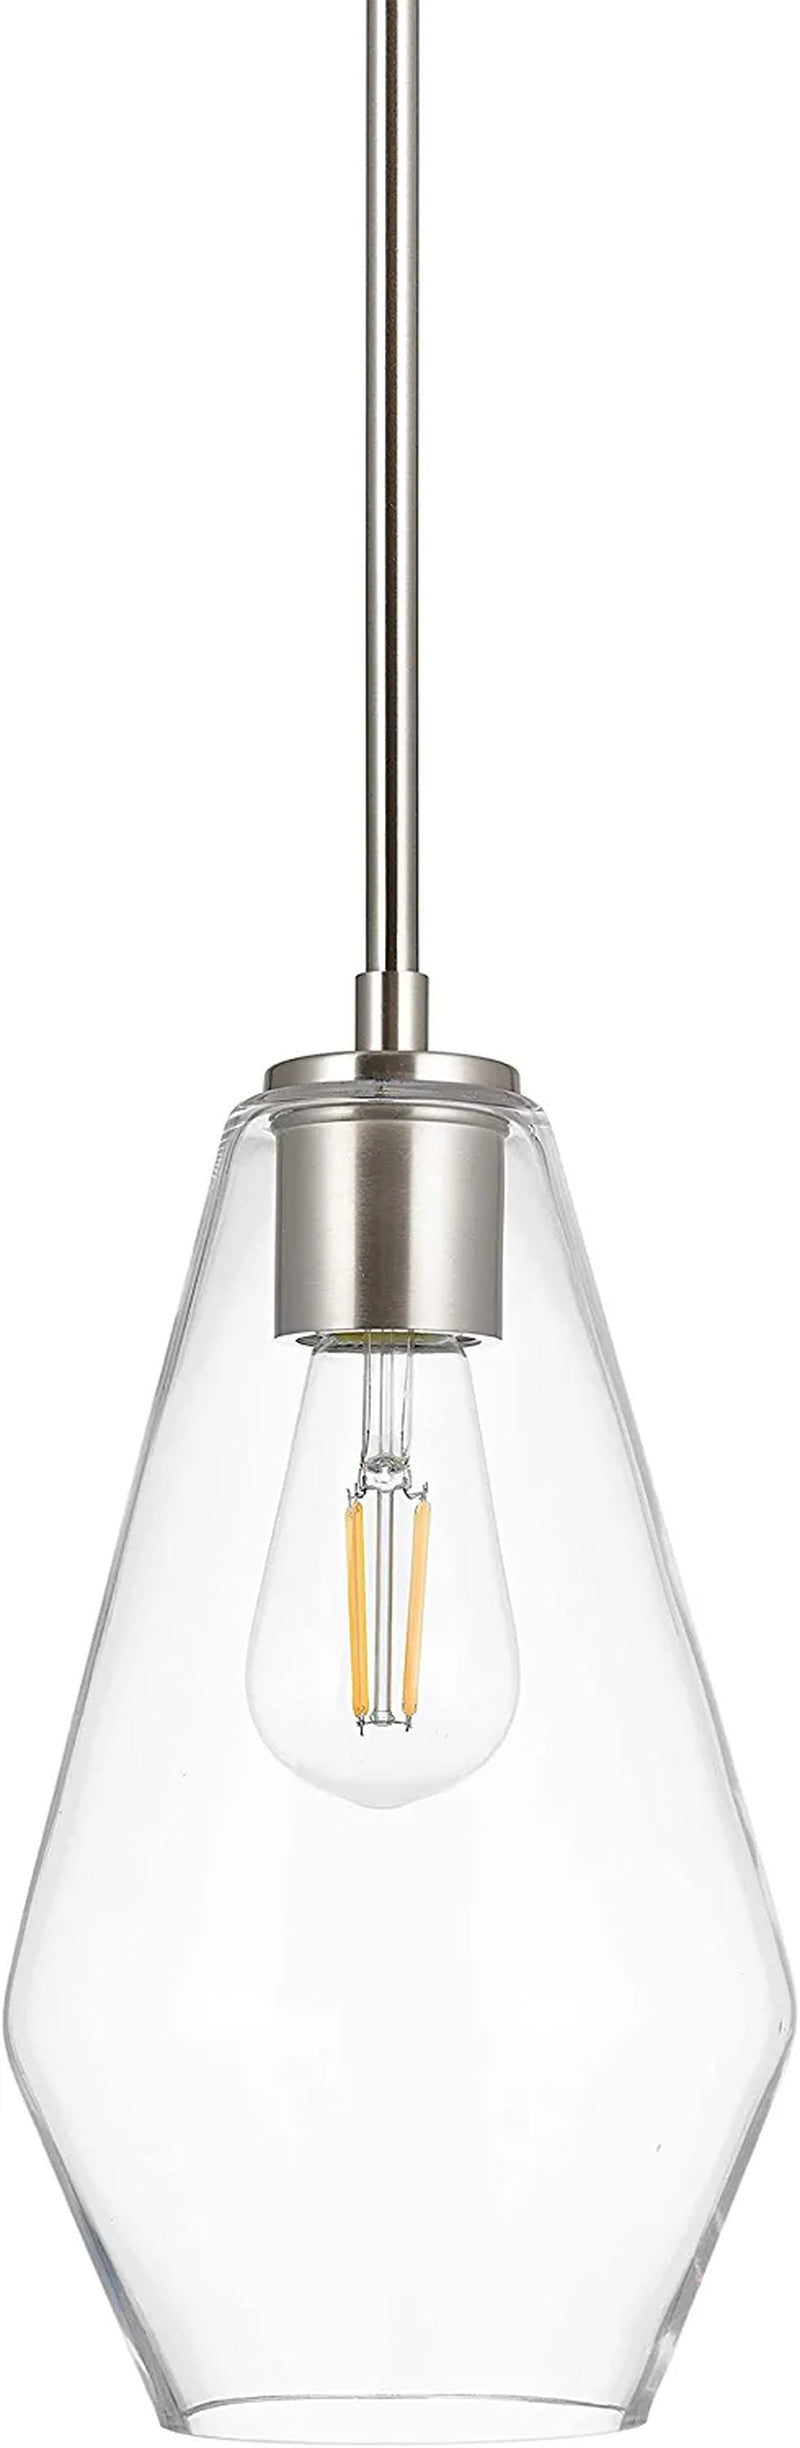 Linea Di Liara Macaria Modern Glass Farmhouse Pendant Lighting for Kitchen Island and over Sink Lighting Fixtures Matte Black Pendant Light Hanging Ceiling Light Angled Clear Glass Shade, UL Listed